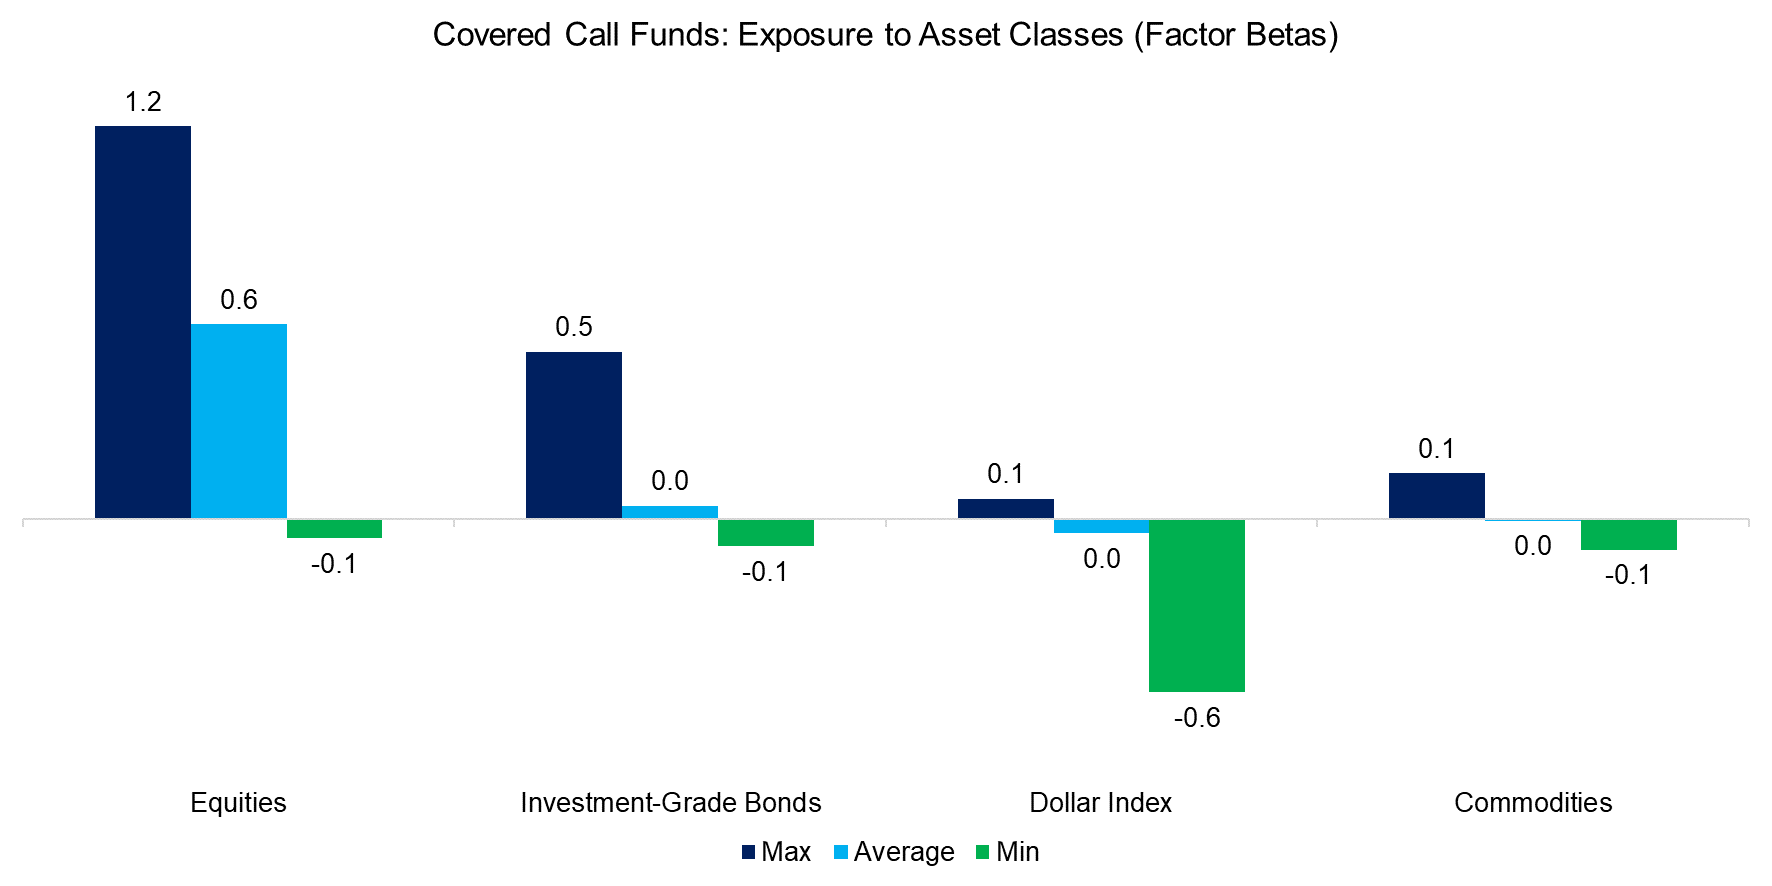 Covered Call Funds Exposure to Asset Classes (Factor Betas)